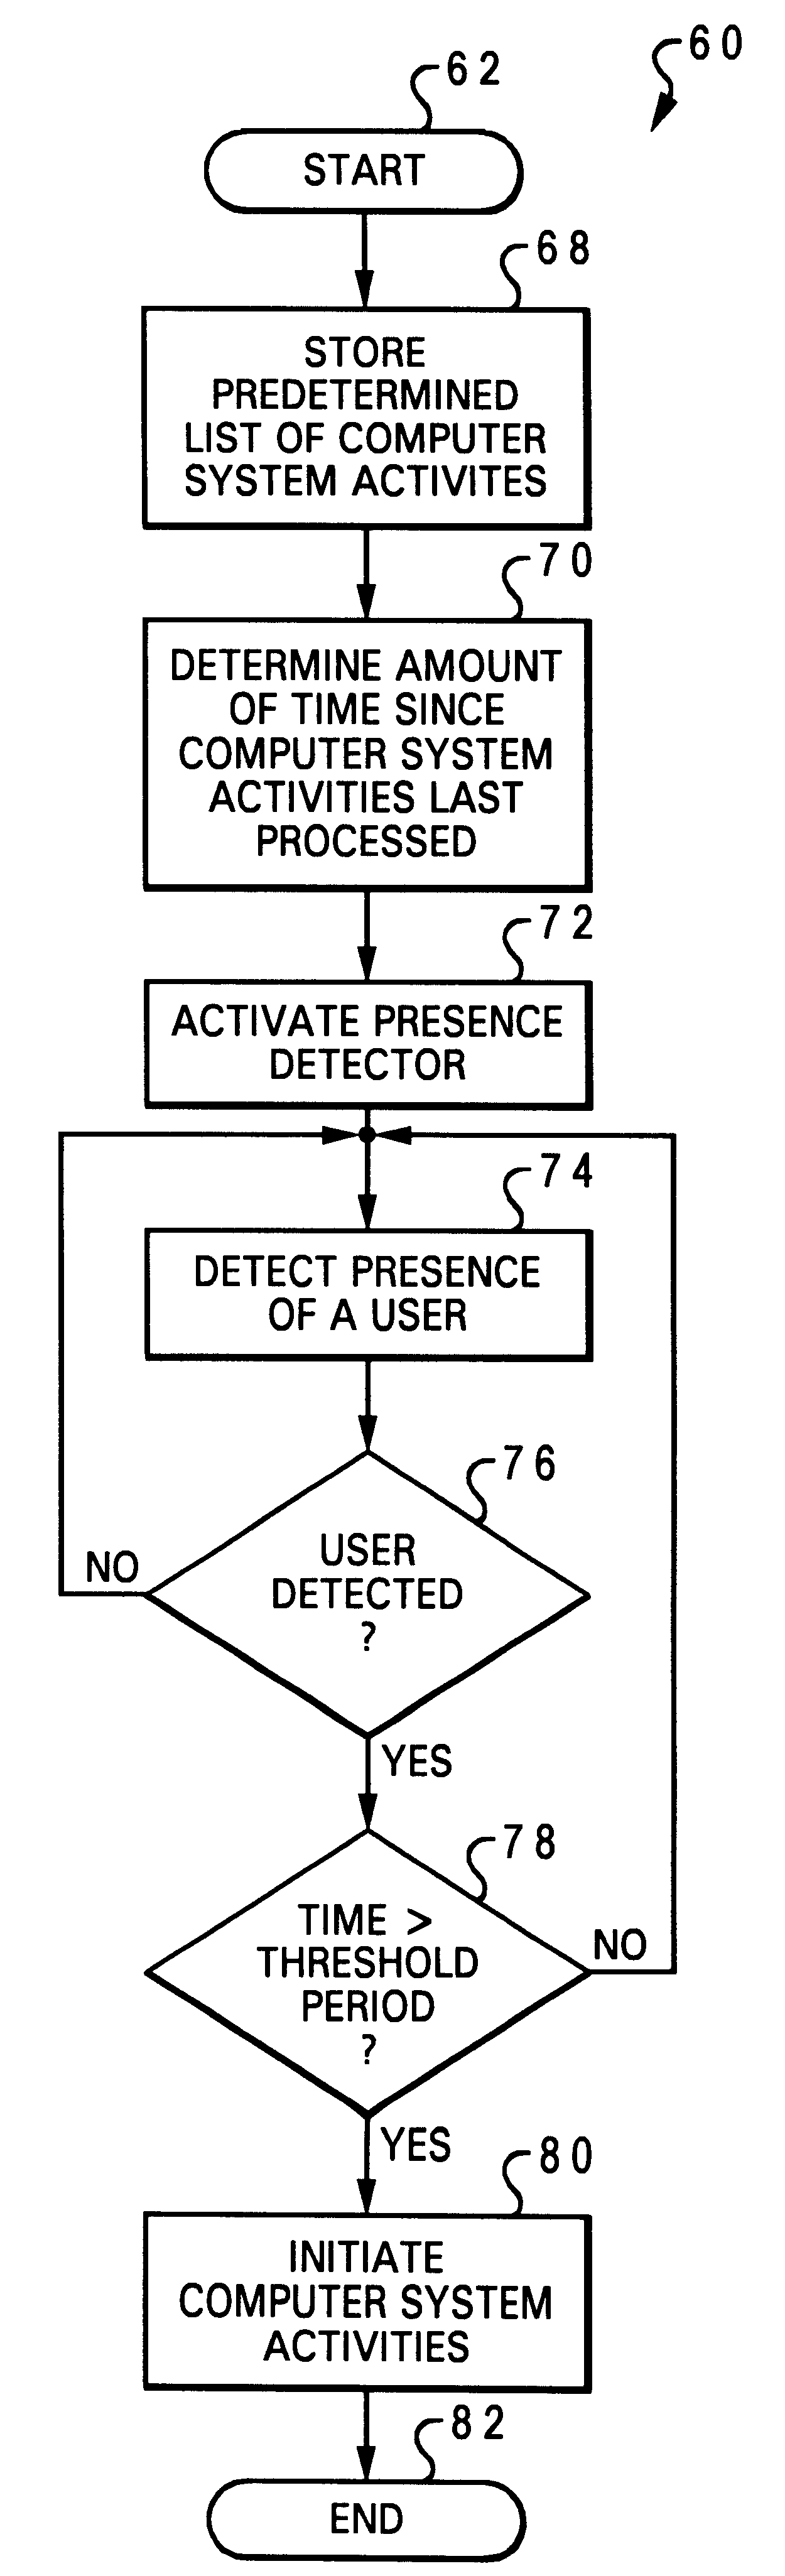 Method and system for the automatic initiation of power application and start-up activities in a computer system